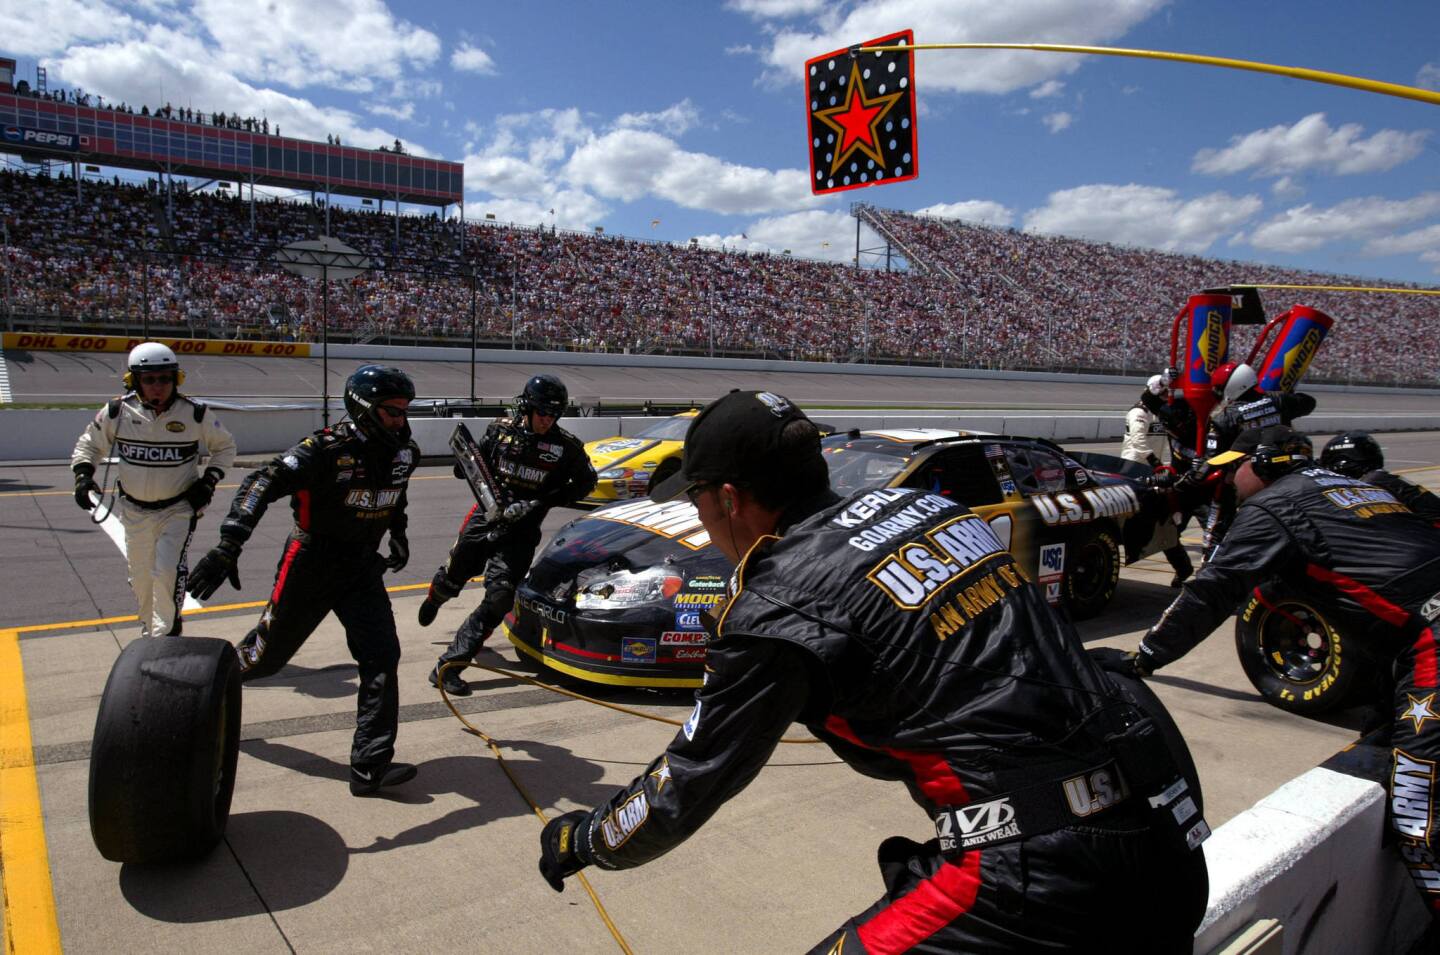 U.S. Army pulls out of NASCAR sponsorships